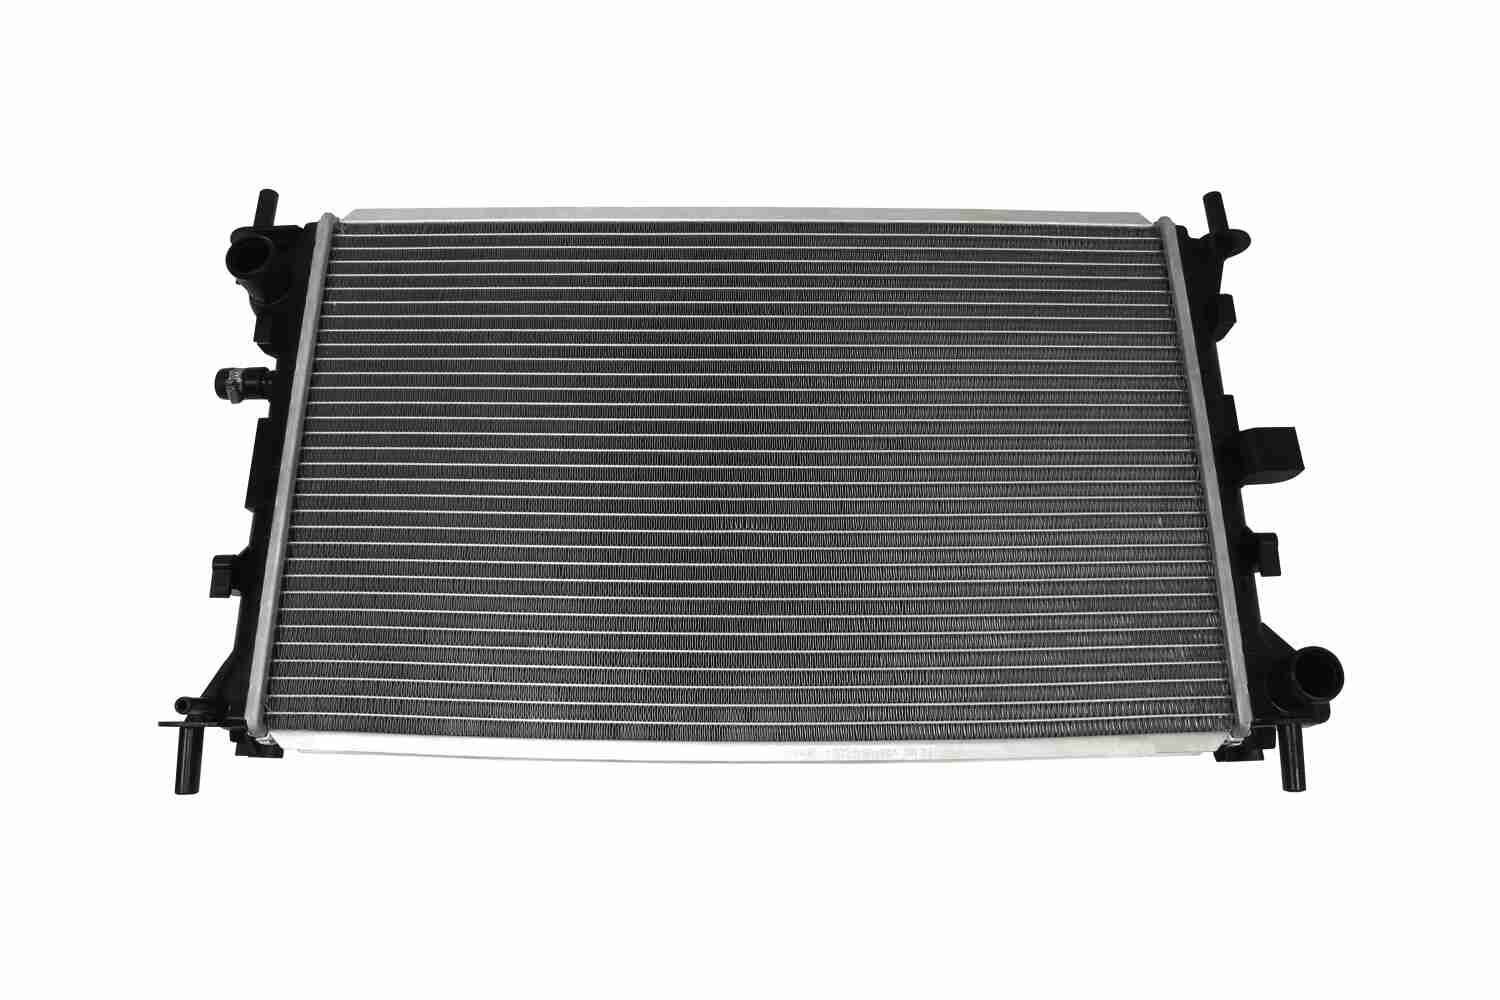 VEMO V25-60-0004 Engine radiator for vehicles with/without air conditioning, 610 x 361 x 26 mm, Original VEMO Quality, Manual Transmission